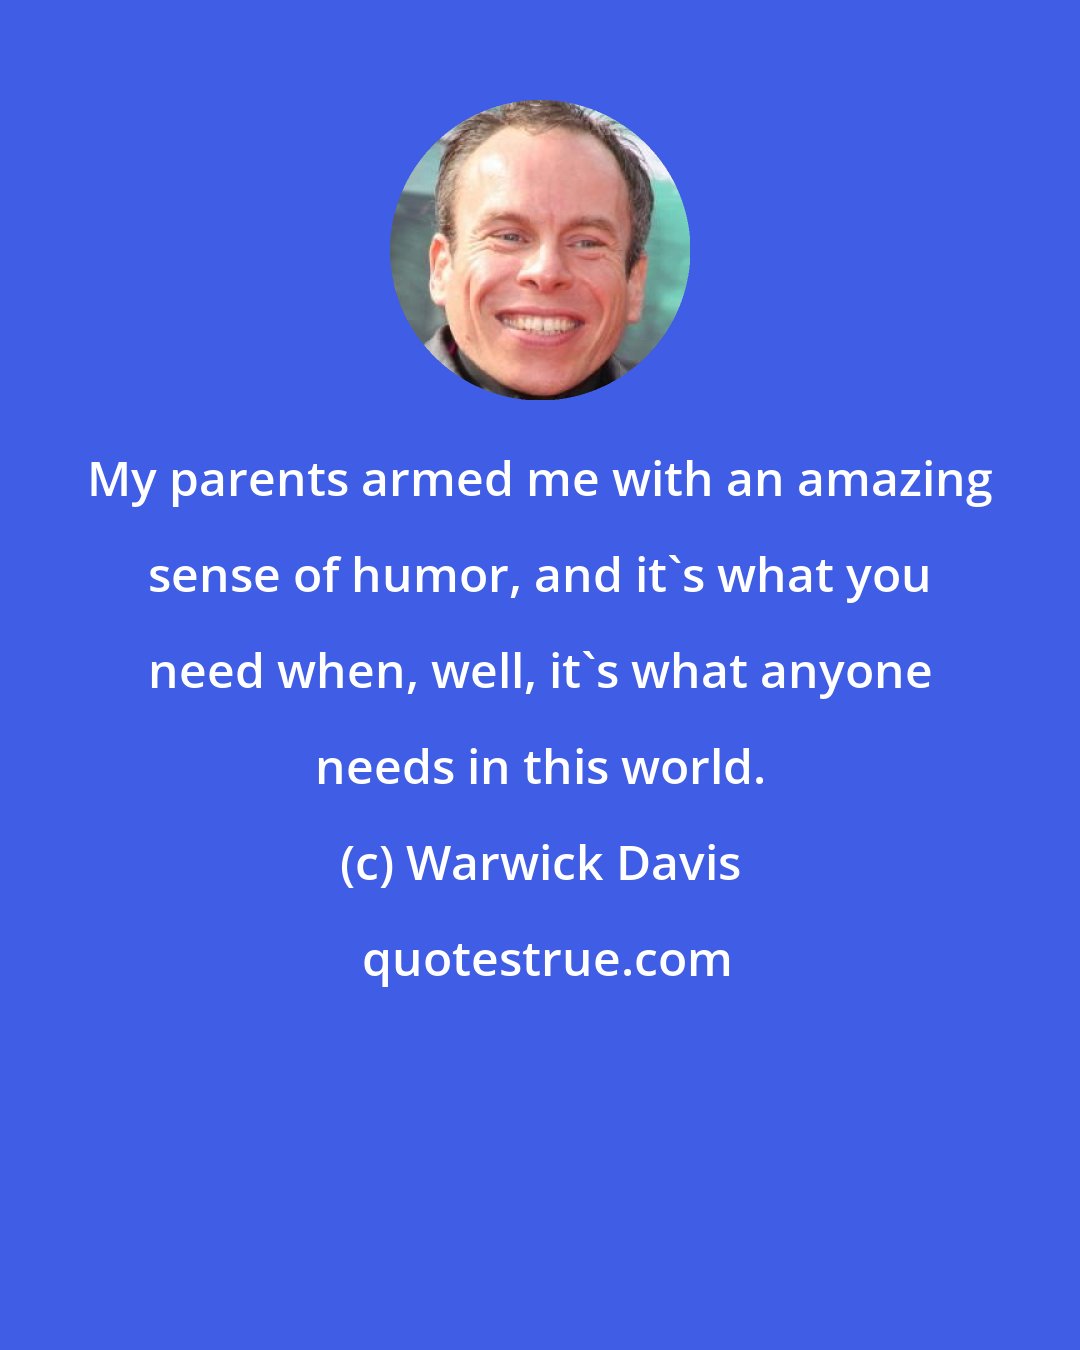 Warwick Davis: My parents armed me with an amazing sense of humor, and it's what you need when, well, it's what anyone needs in this world.